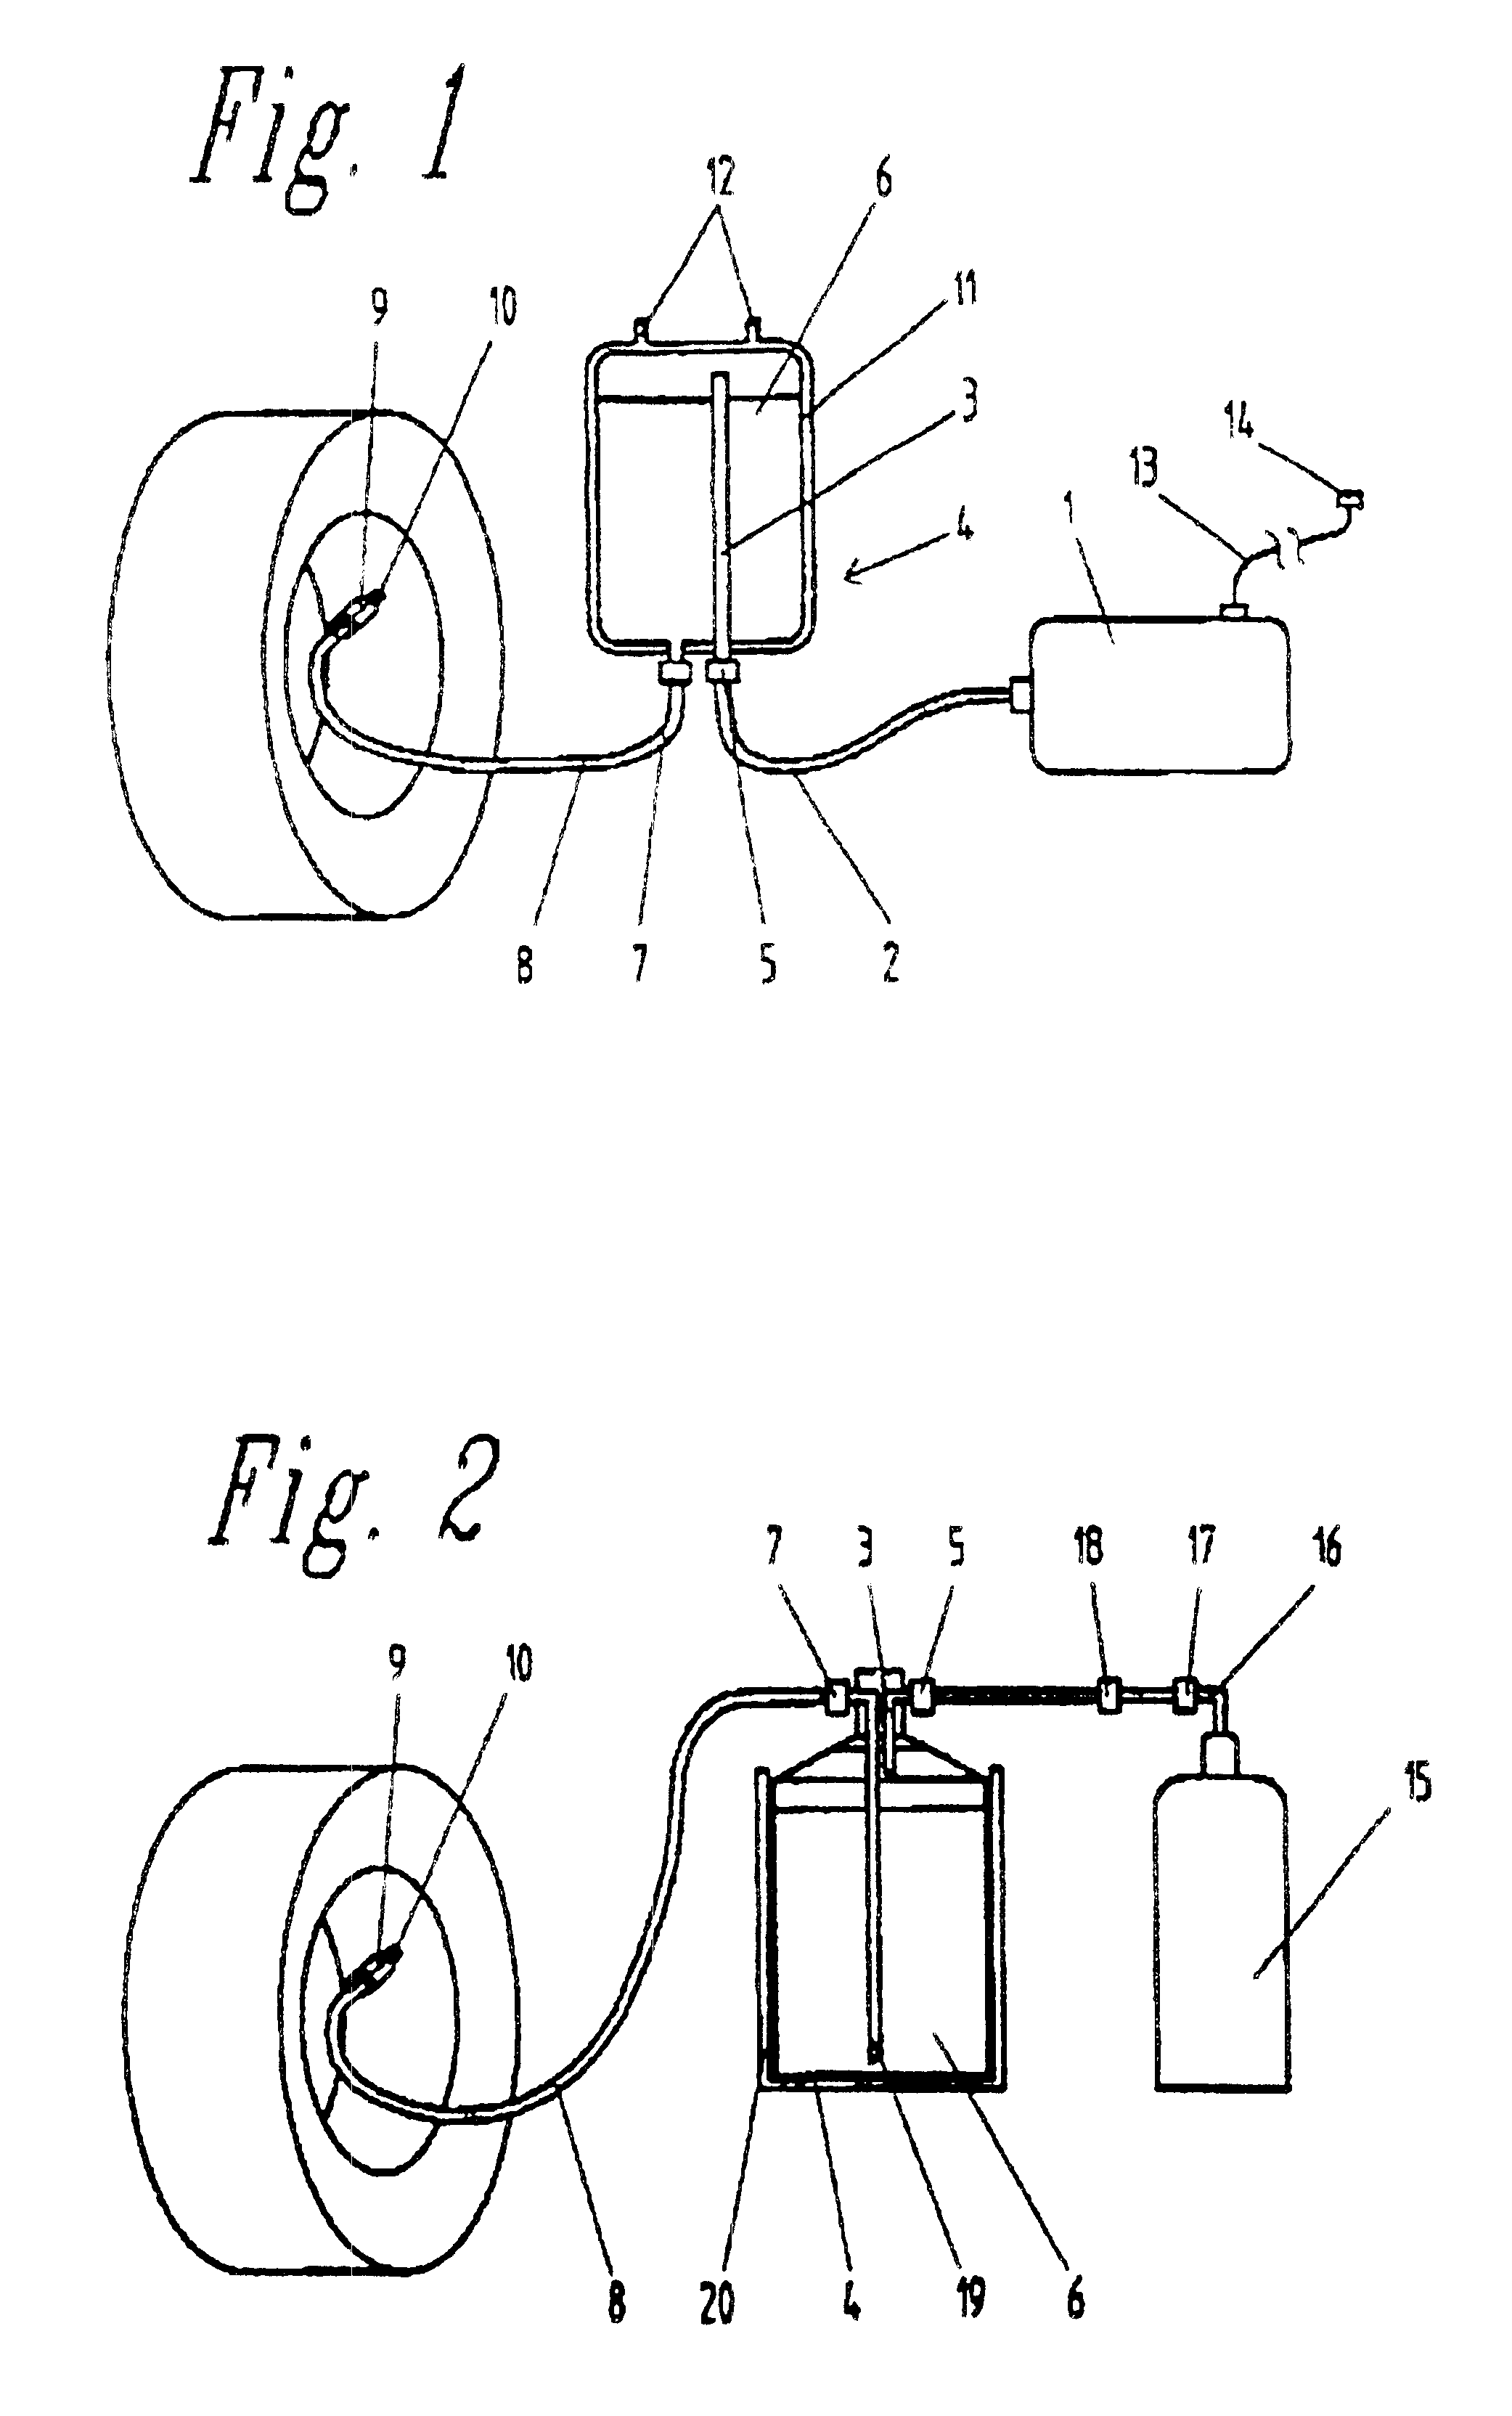 Preparation for sealing punctured tires and apparatus for the sealing and pumping up of tires